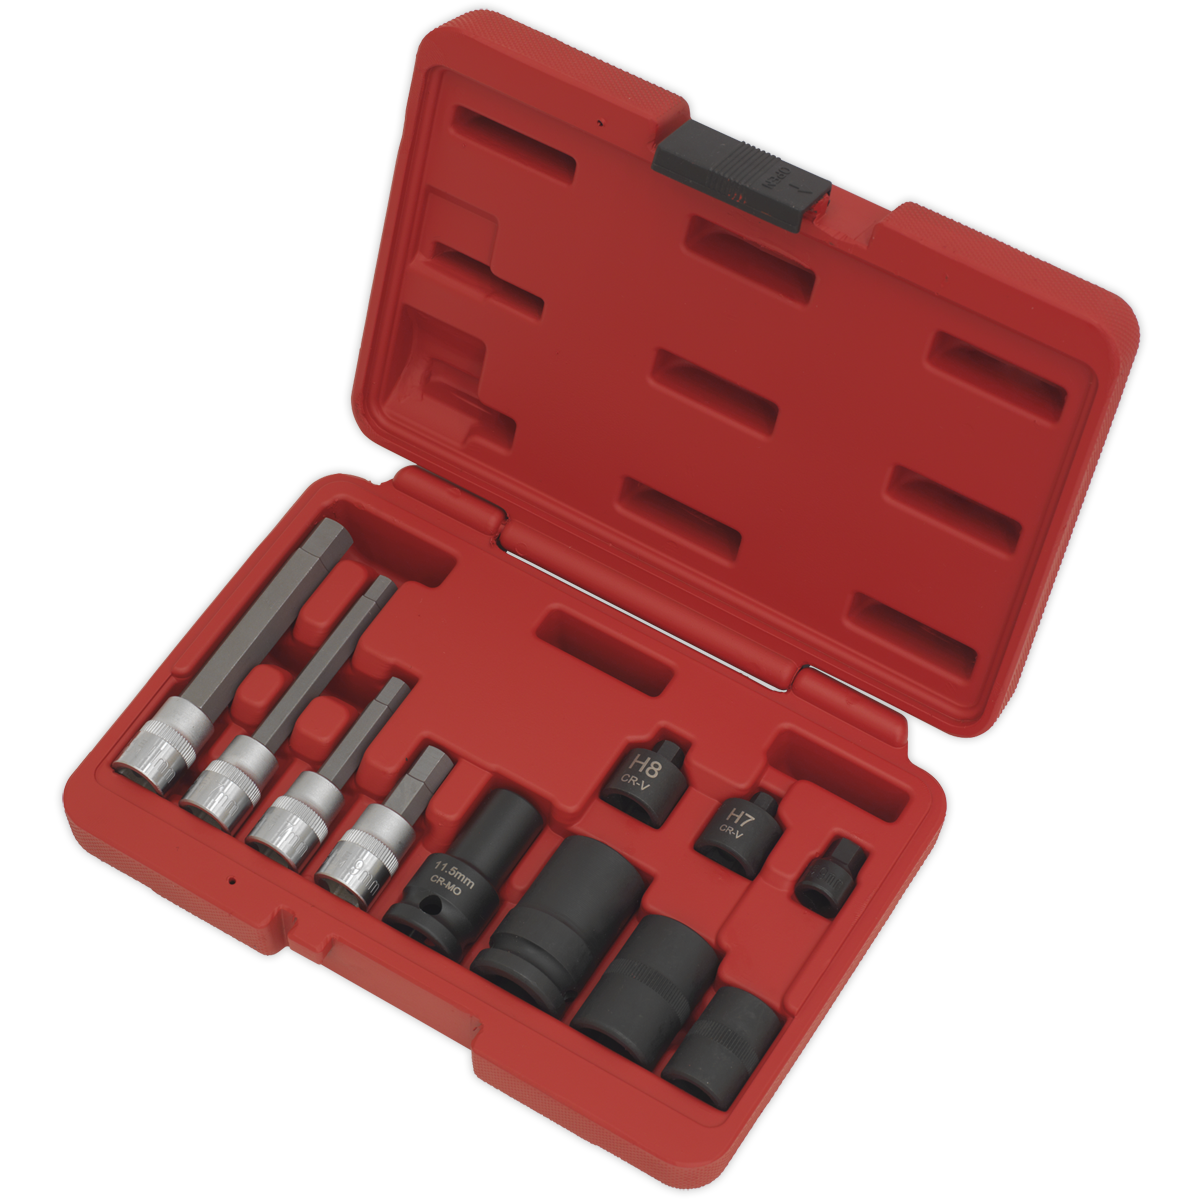 selection of vehicle specific sockets and bits for the removal of brake caliper bolts